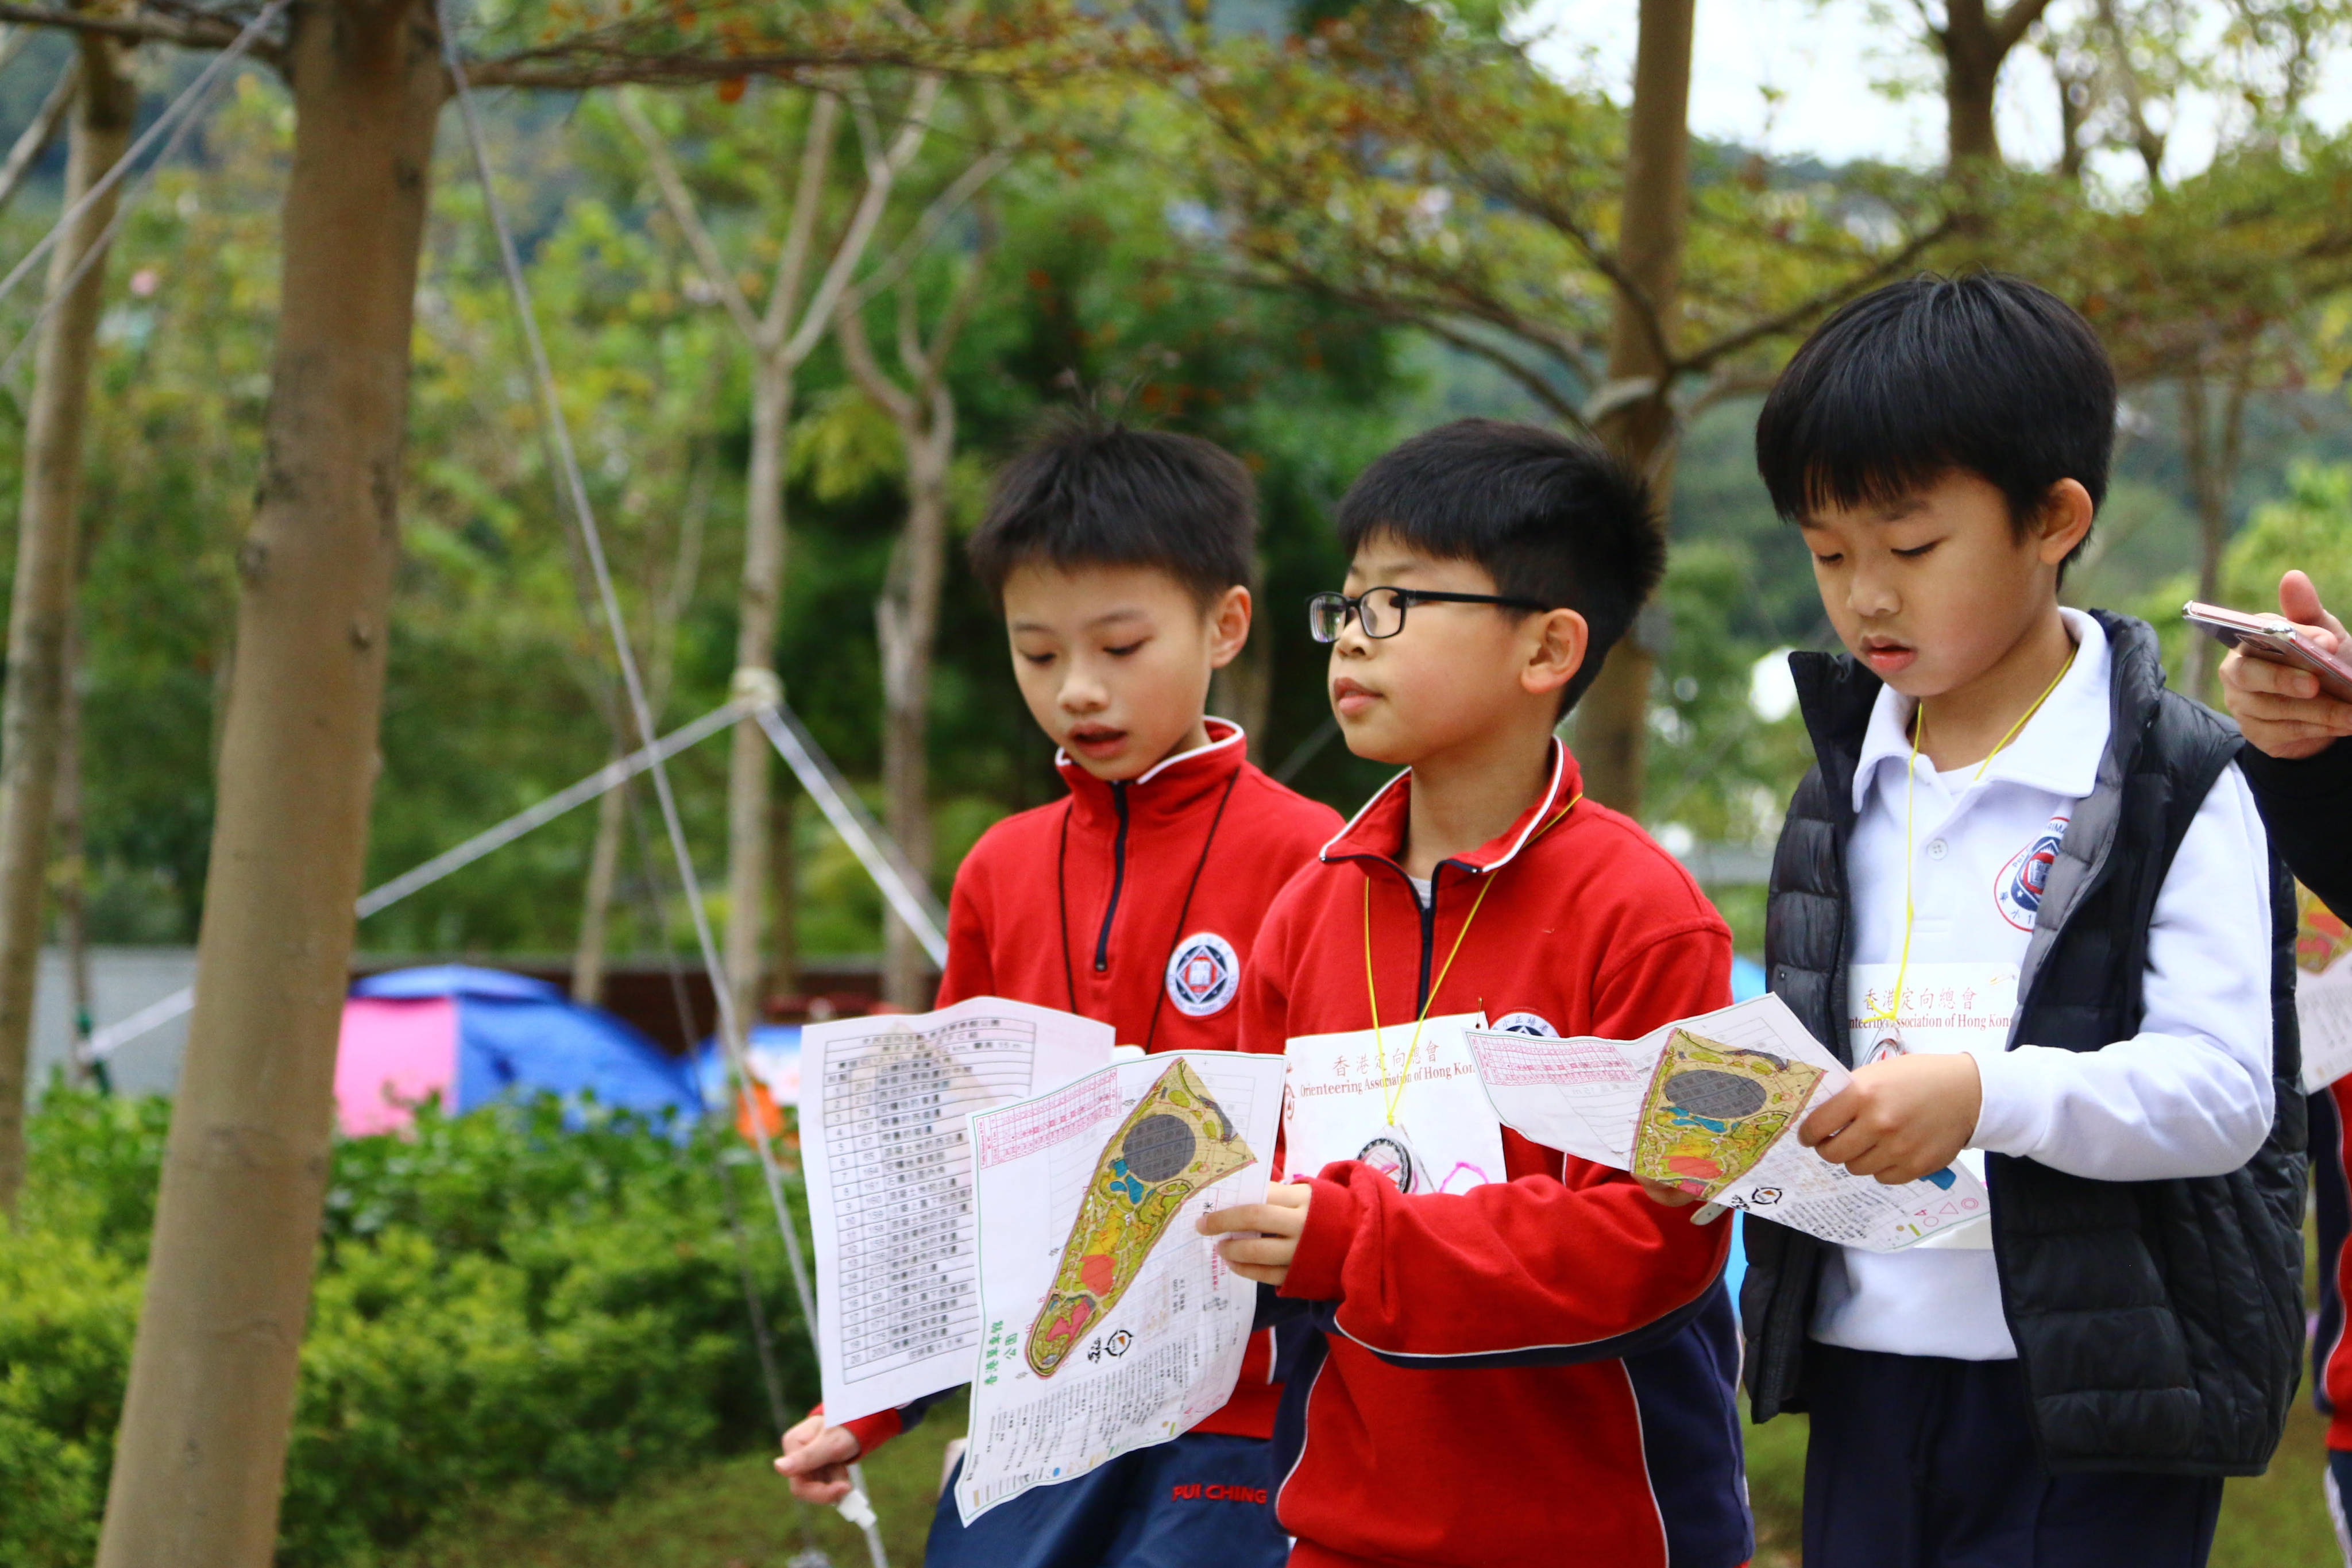 Children take part in an orienteering activity in Tseung Kwan O. Photo: SCMP